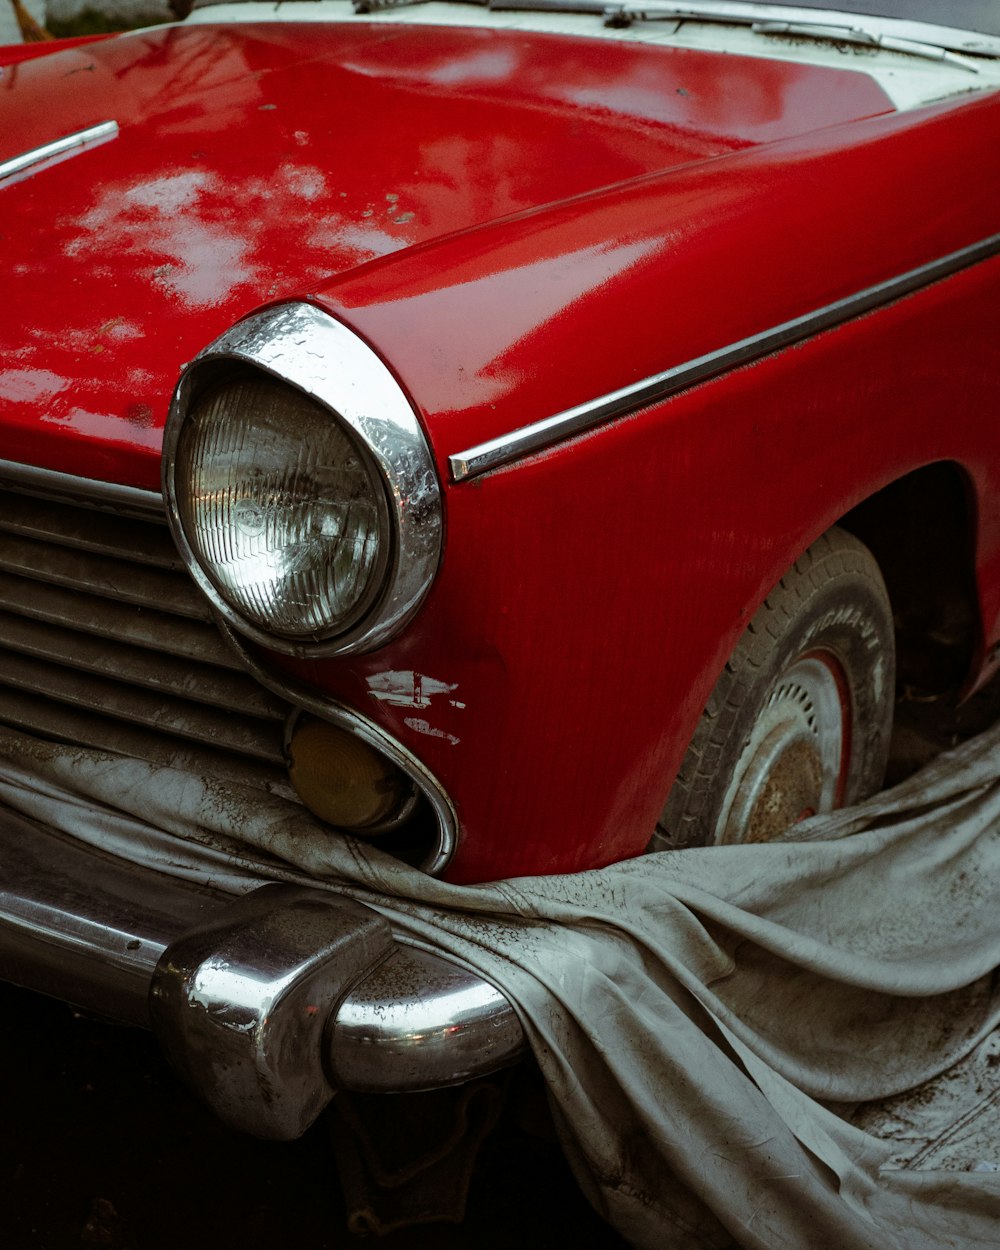 an old red car with a cloth draped around it